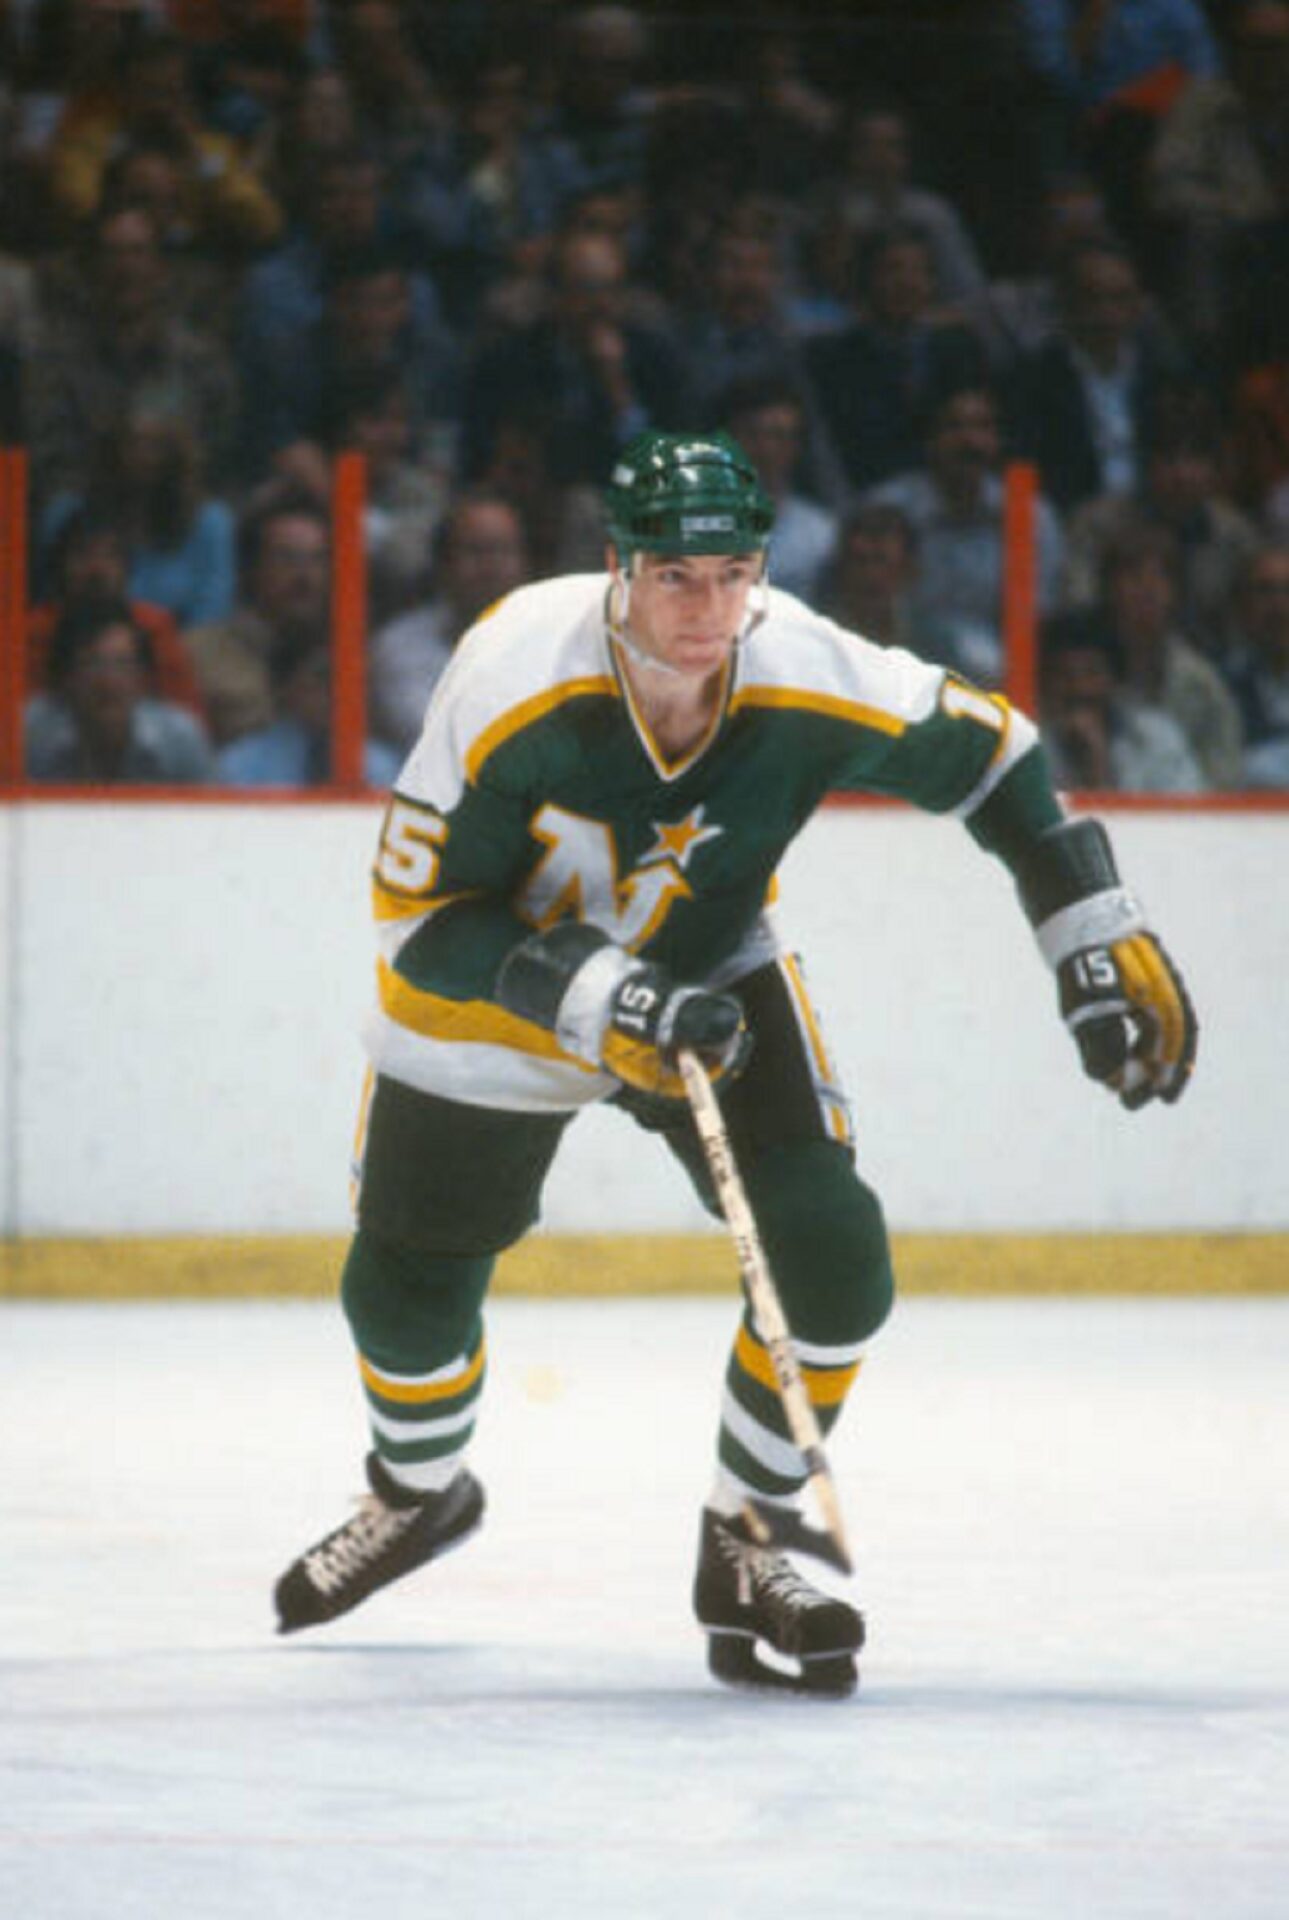 This Day In Hockey History-May 16, 1991-Forgotten North Star Bobby Smith Keeps on Shining